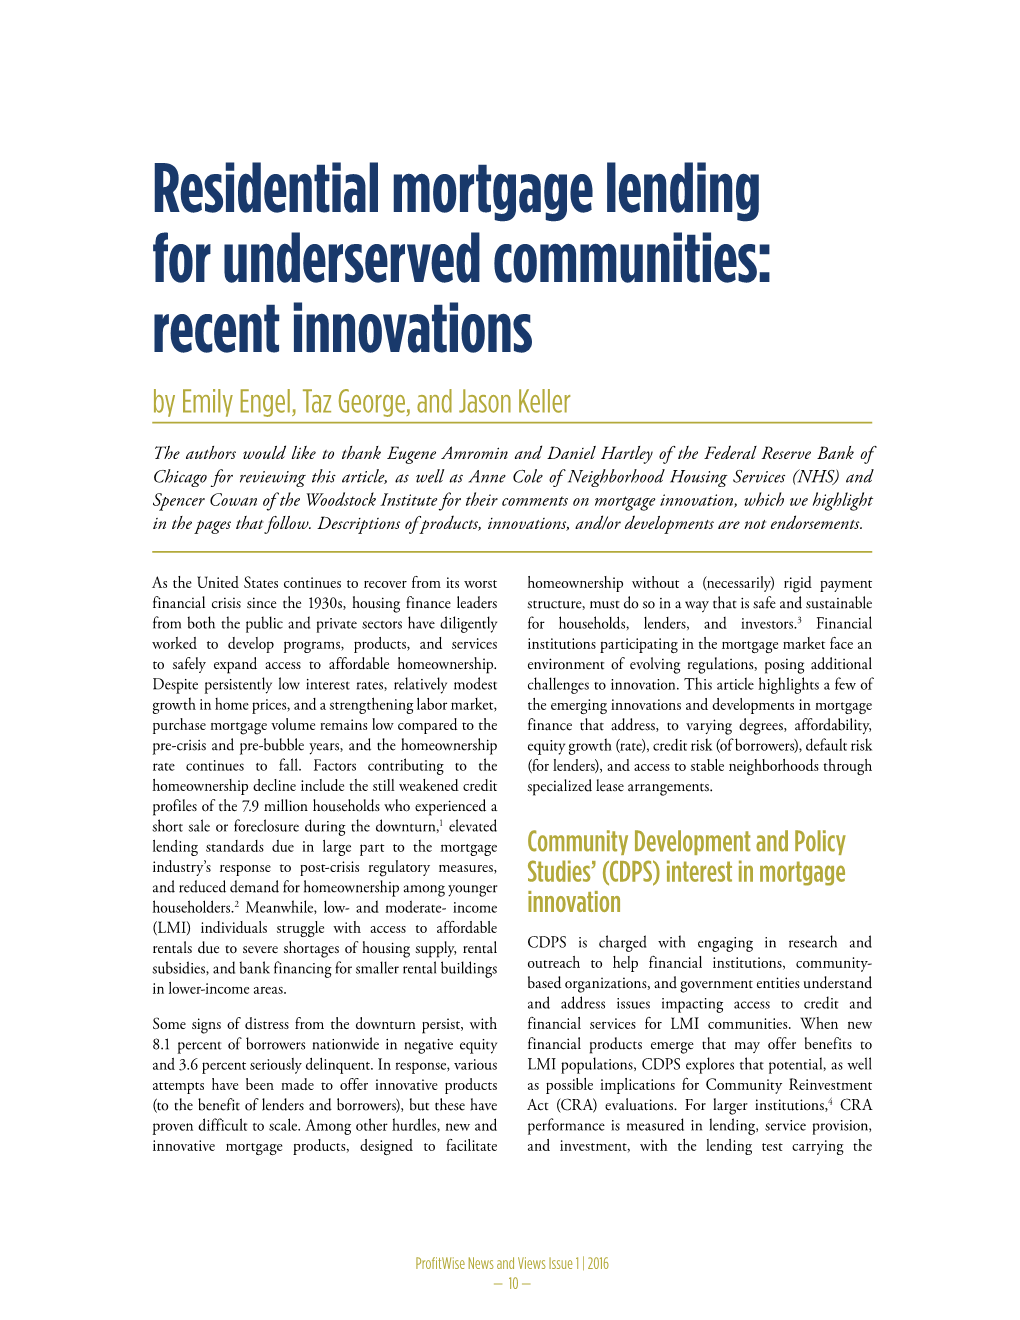 Residential Mortgage Lending for Underserved Communities: Recent Innovations by Emily Engel, Taz George, and Jason Keller